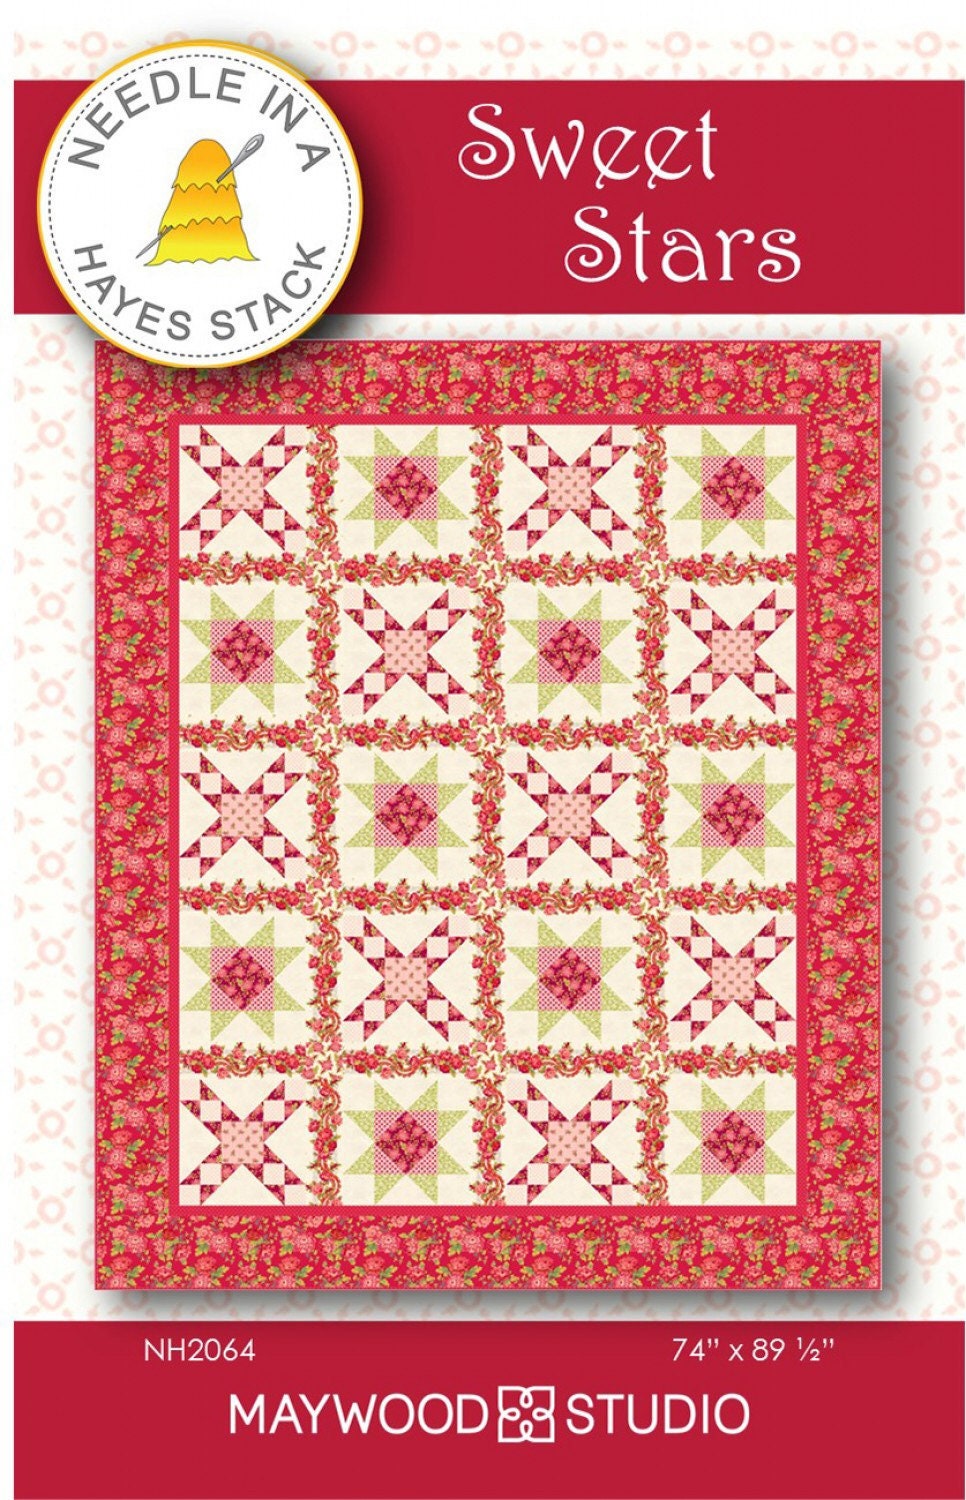 Sweet Stars Quilt Pattern - Needle in a Hayes Stack - 74” x 89.5”